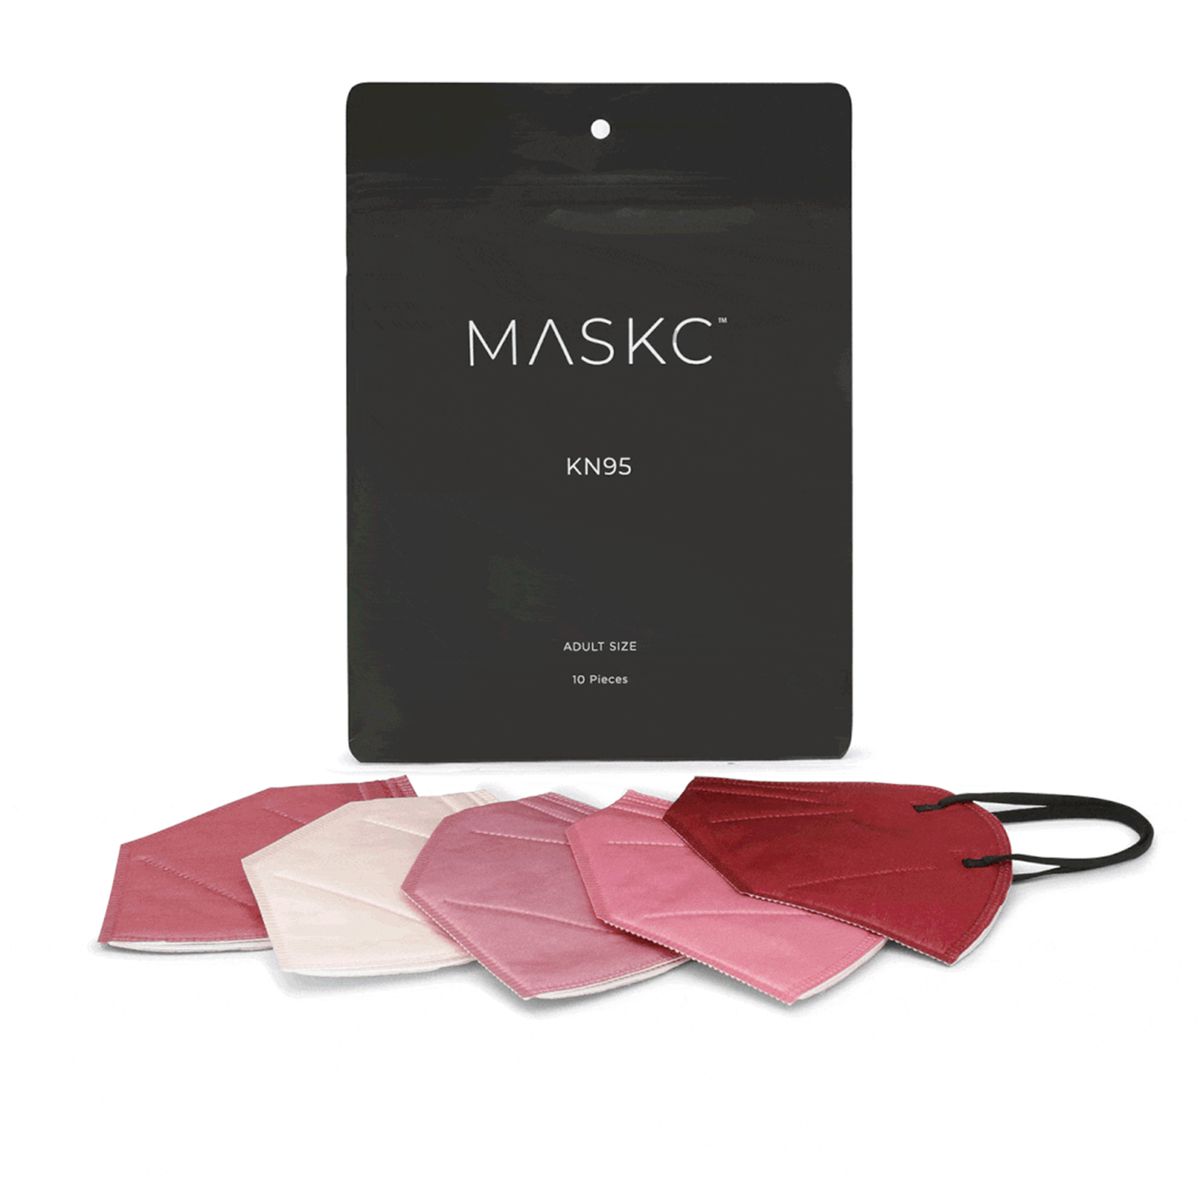 Maskc Restock First-Person Review